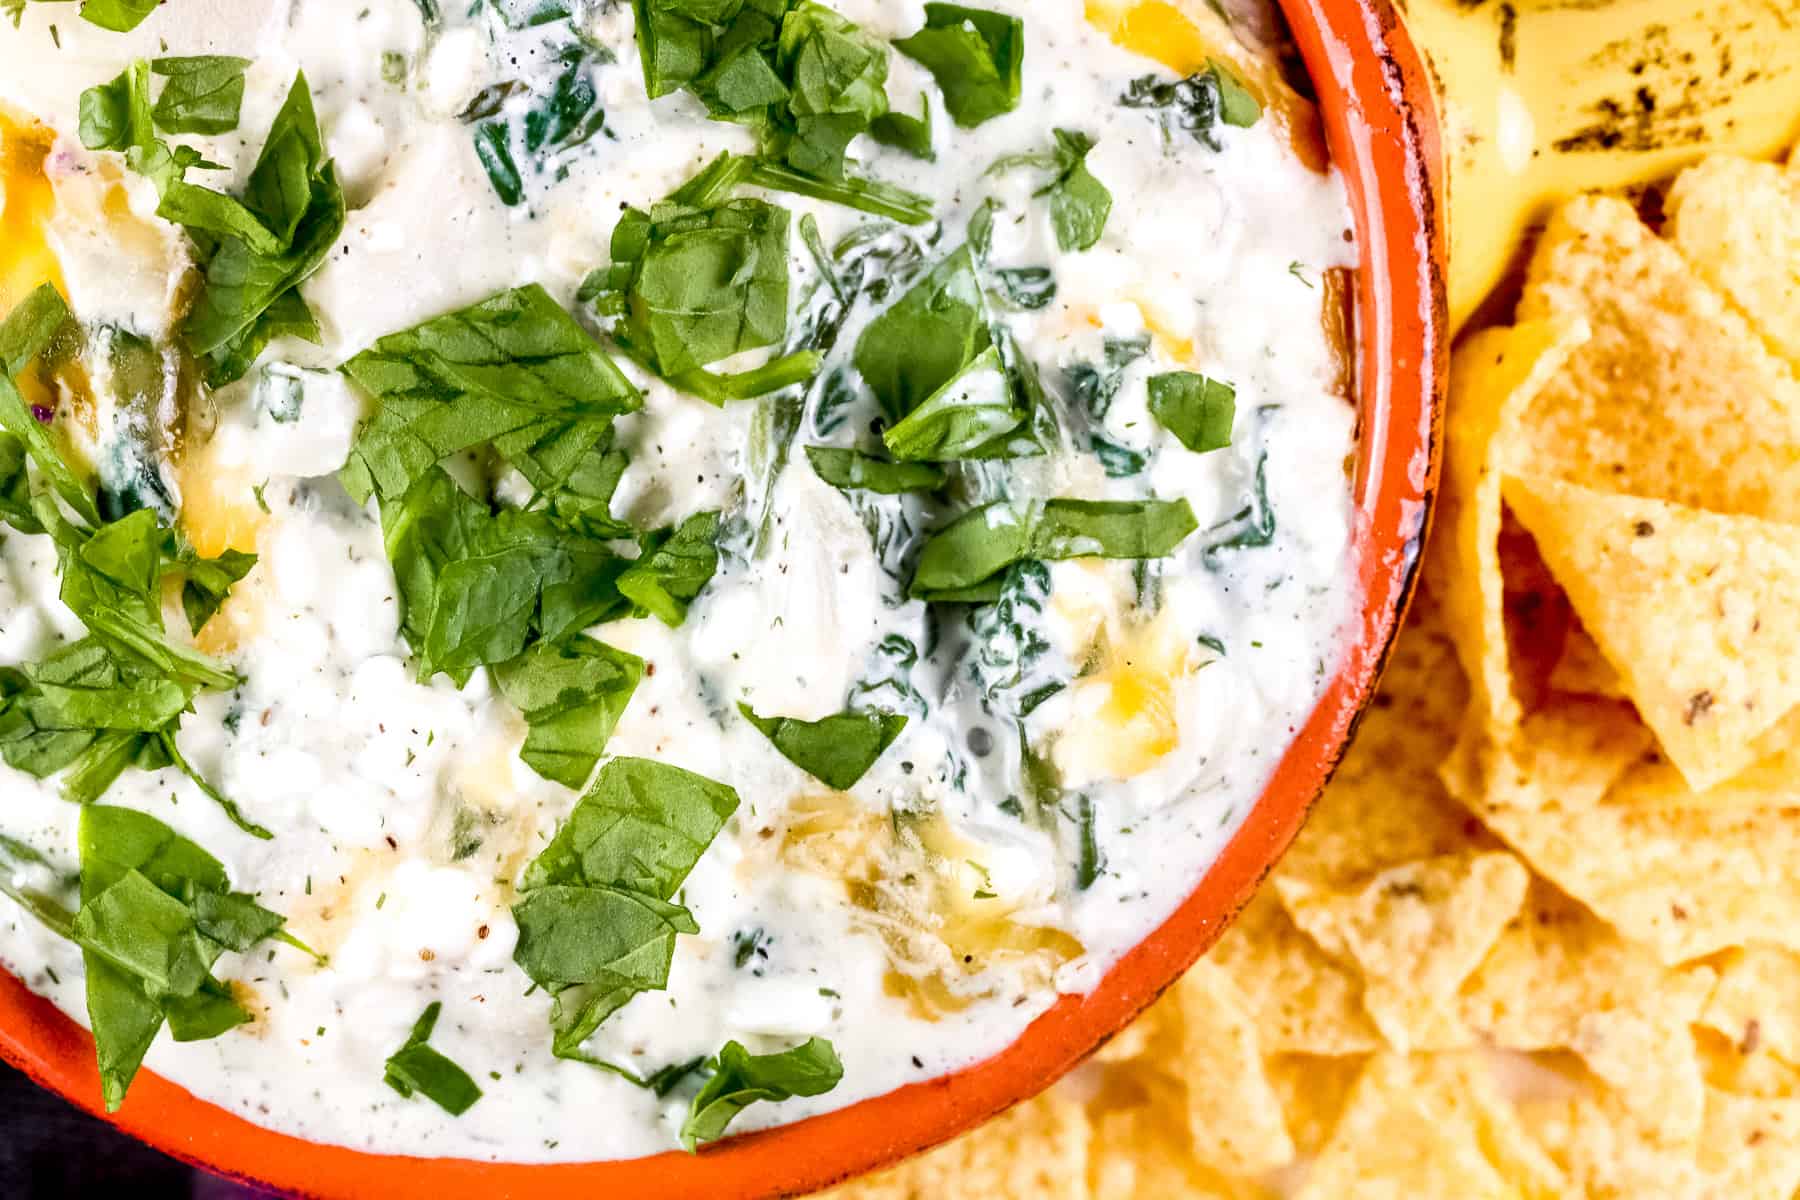 Plated spinach dip with chips.